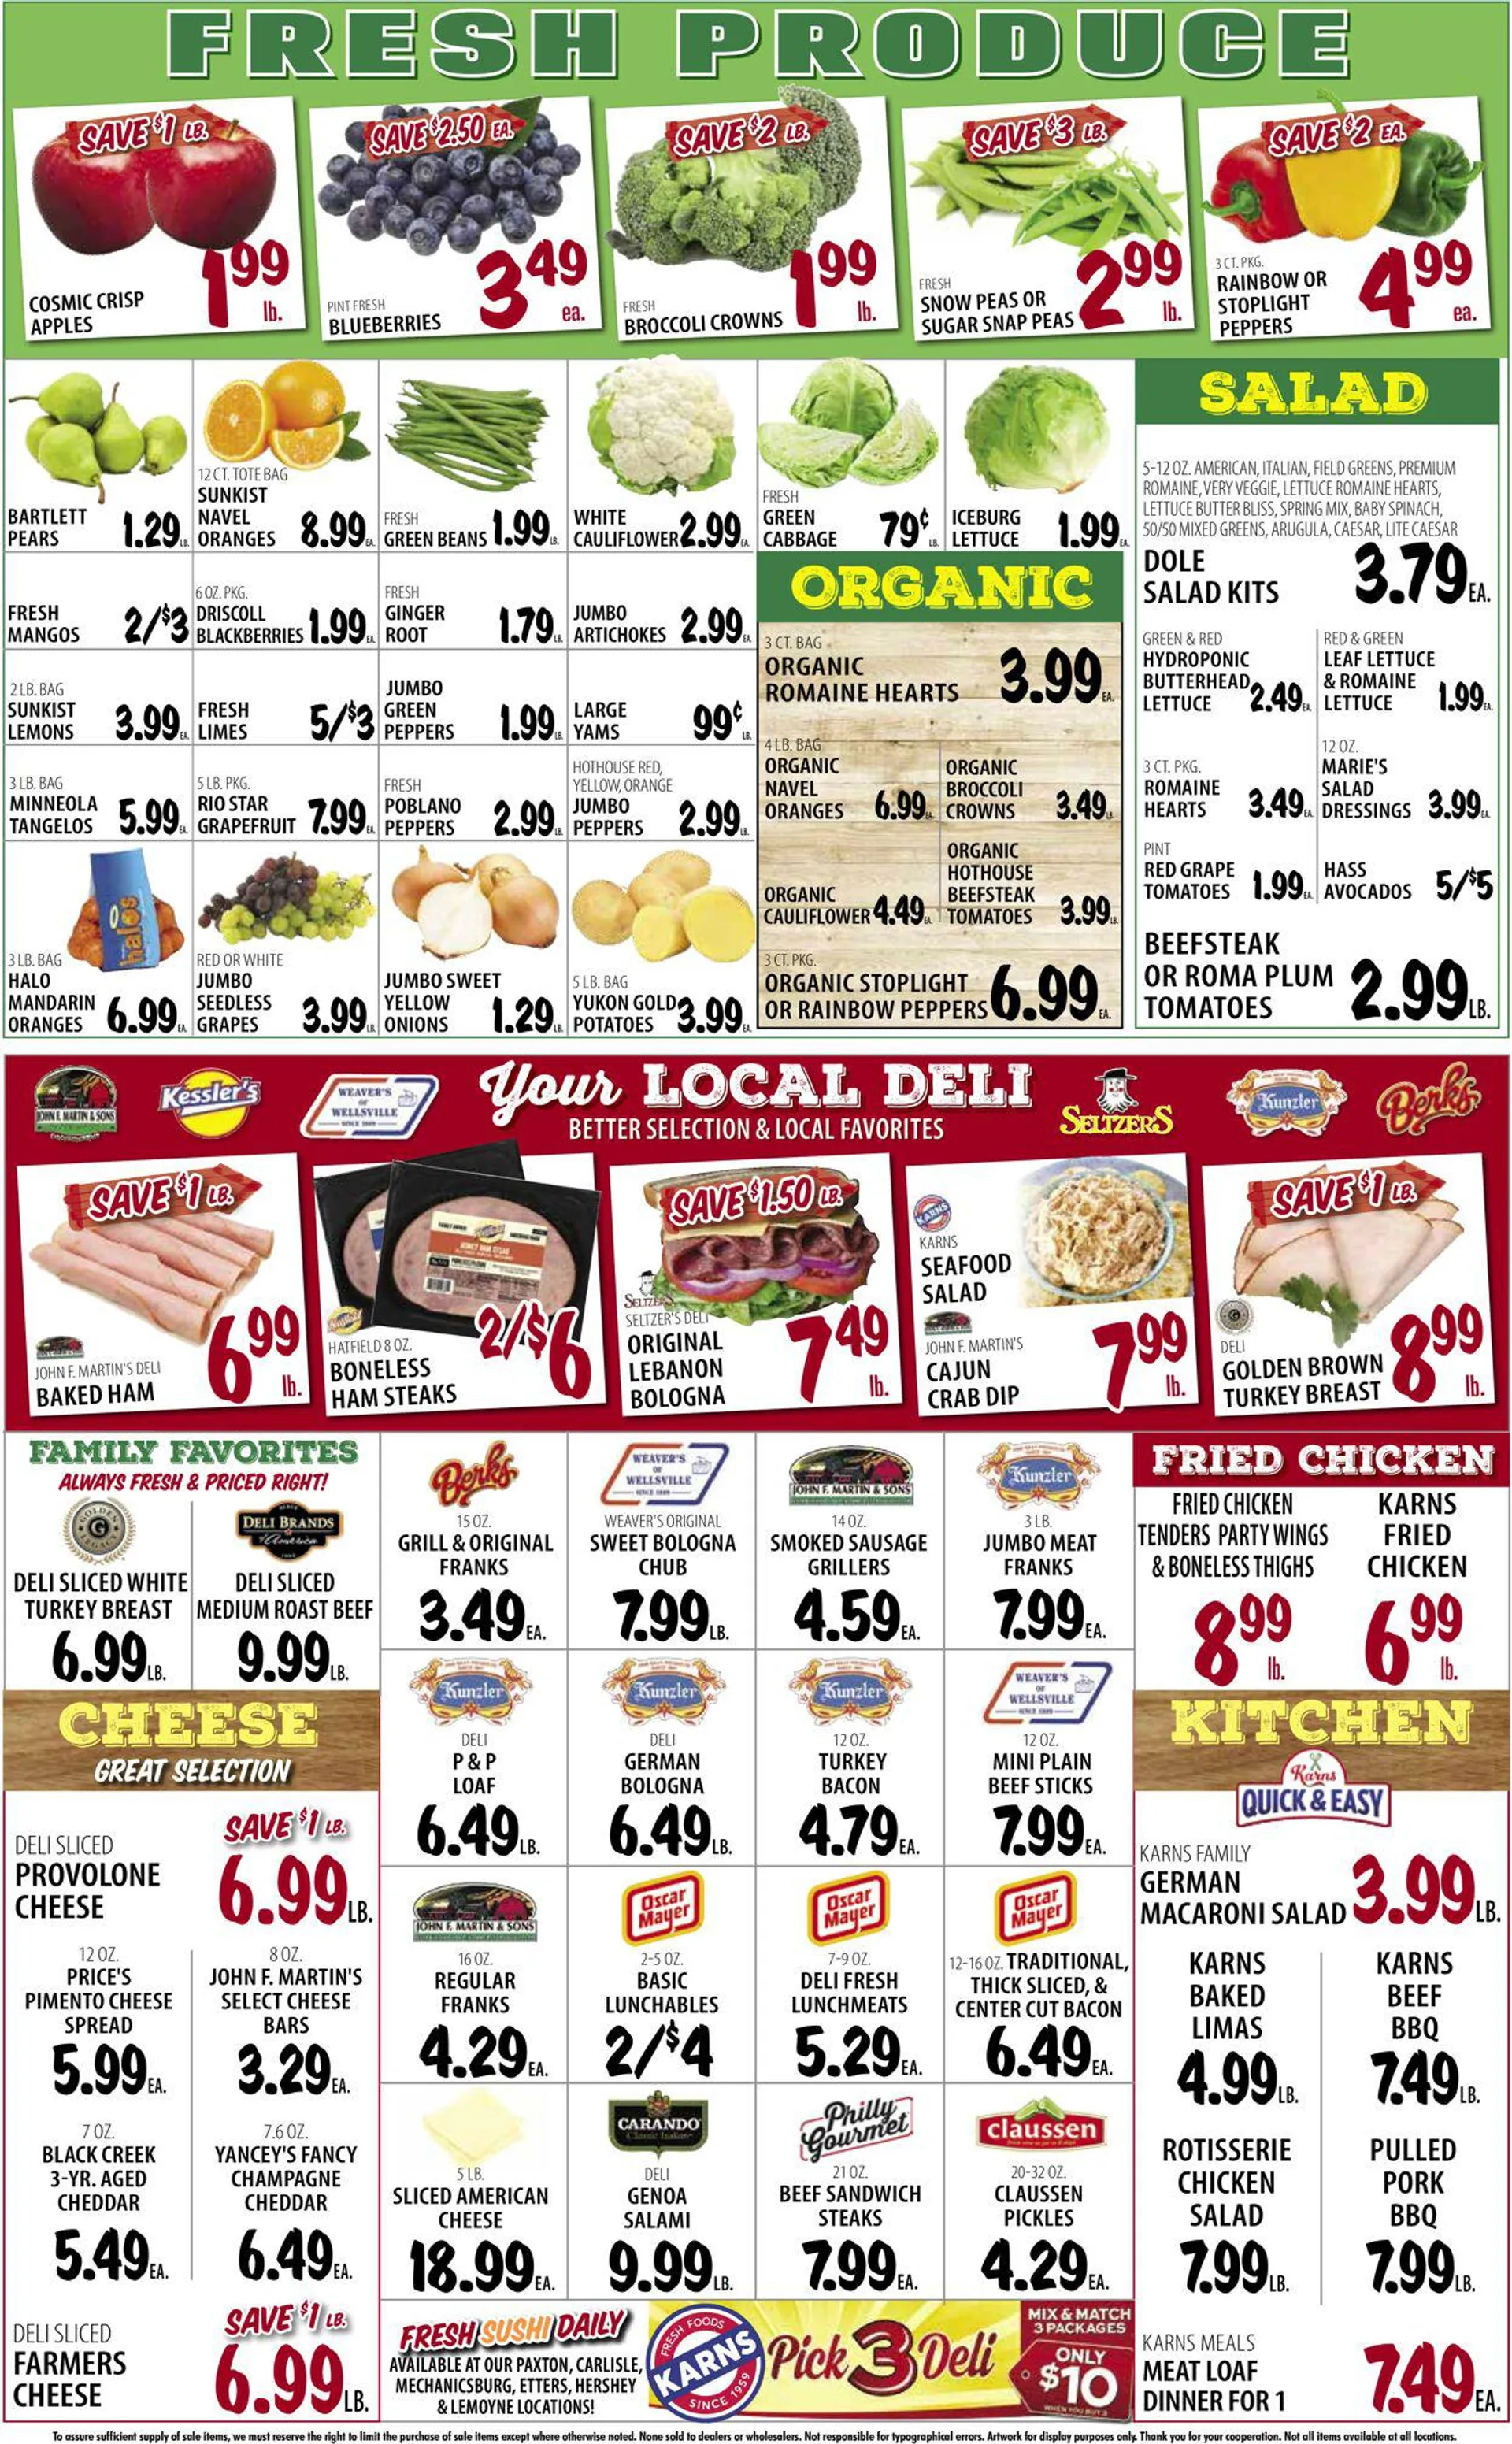 Karns Quality Foods Current weekly ad - 4